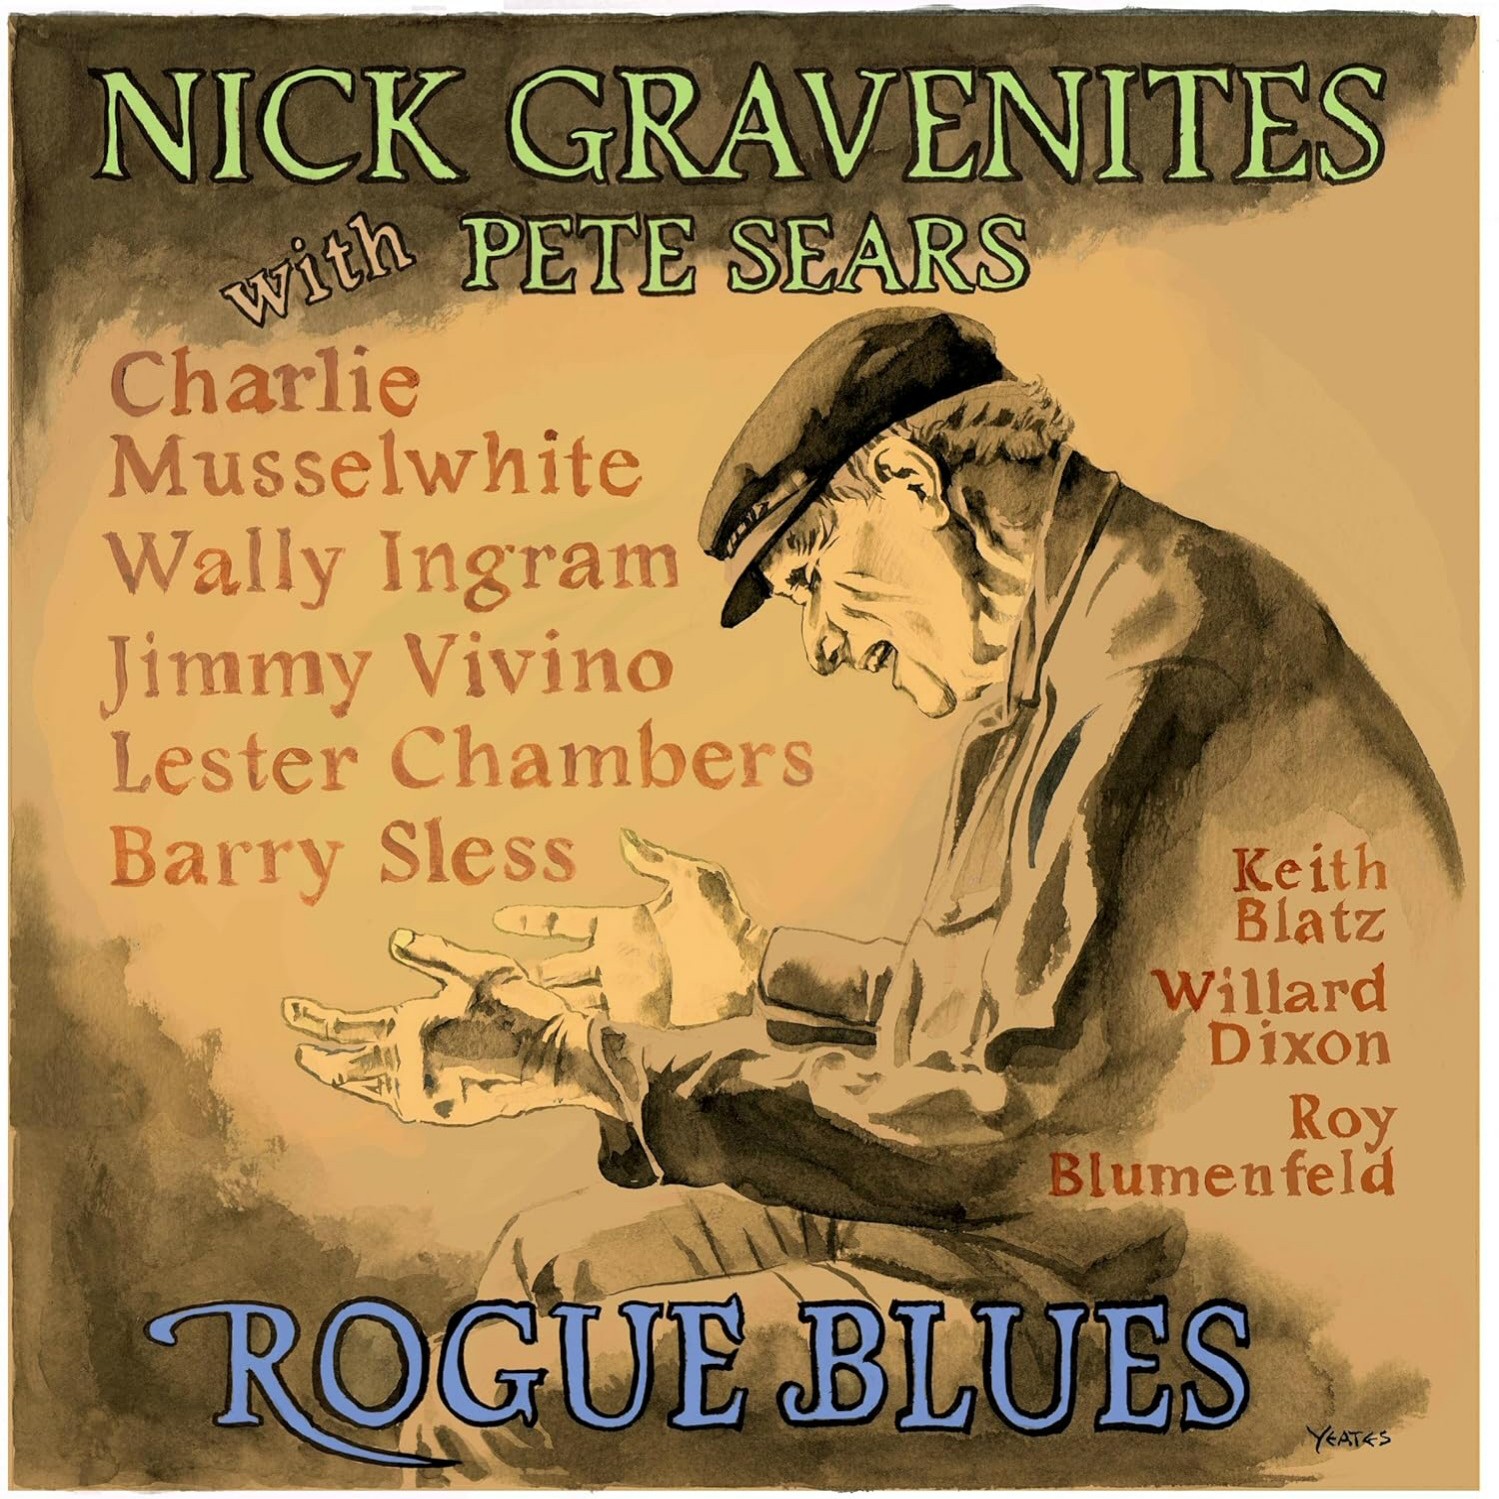 Nick Gravenites With Pete Sears - Rogue Blues